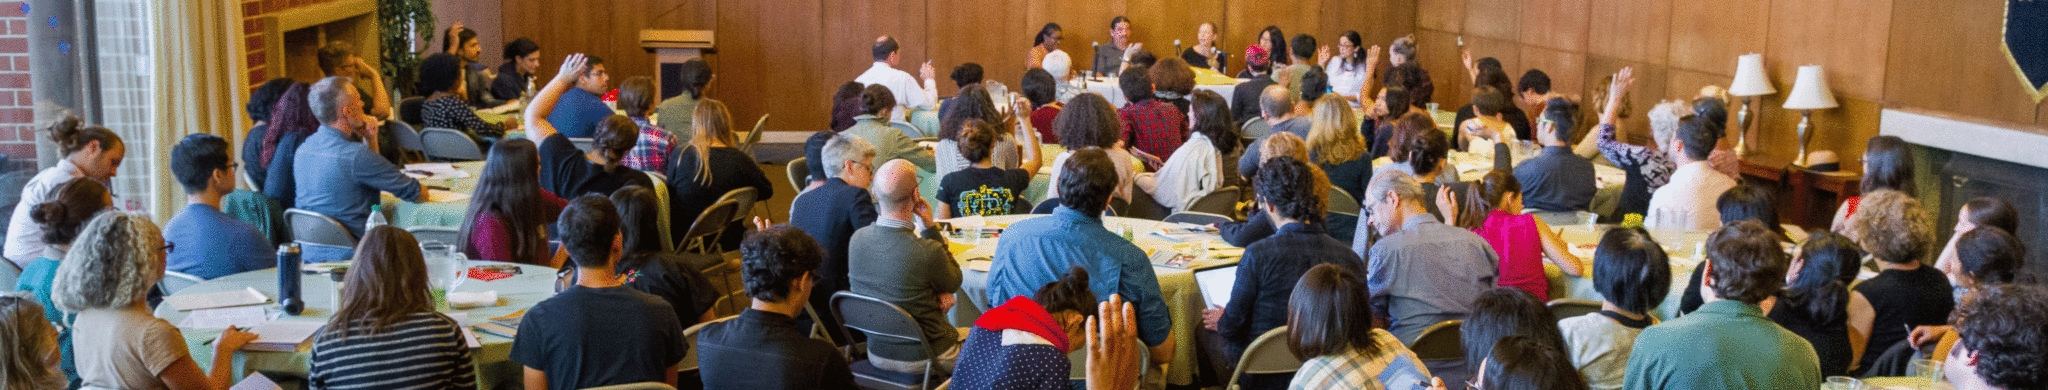 Decolonizing Foodways 2015 Audience. Photo by Jonathan Fong